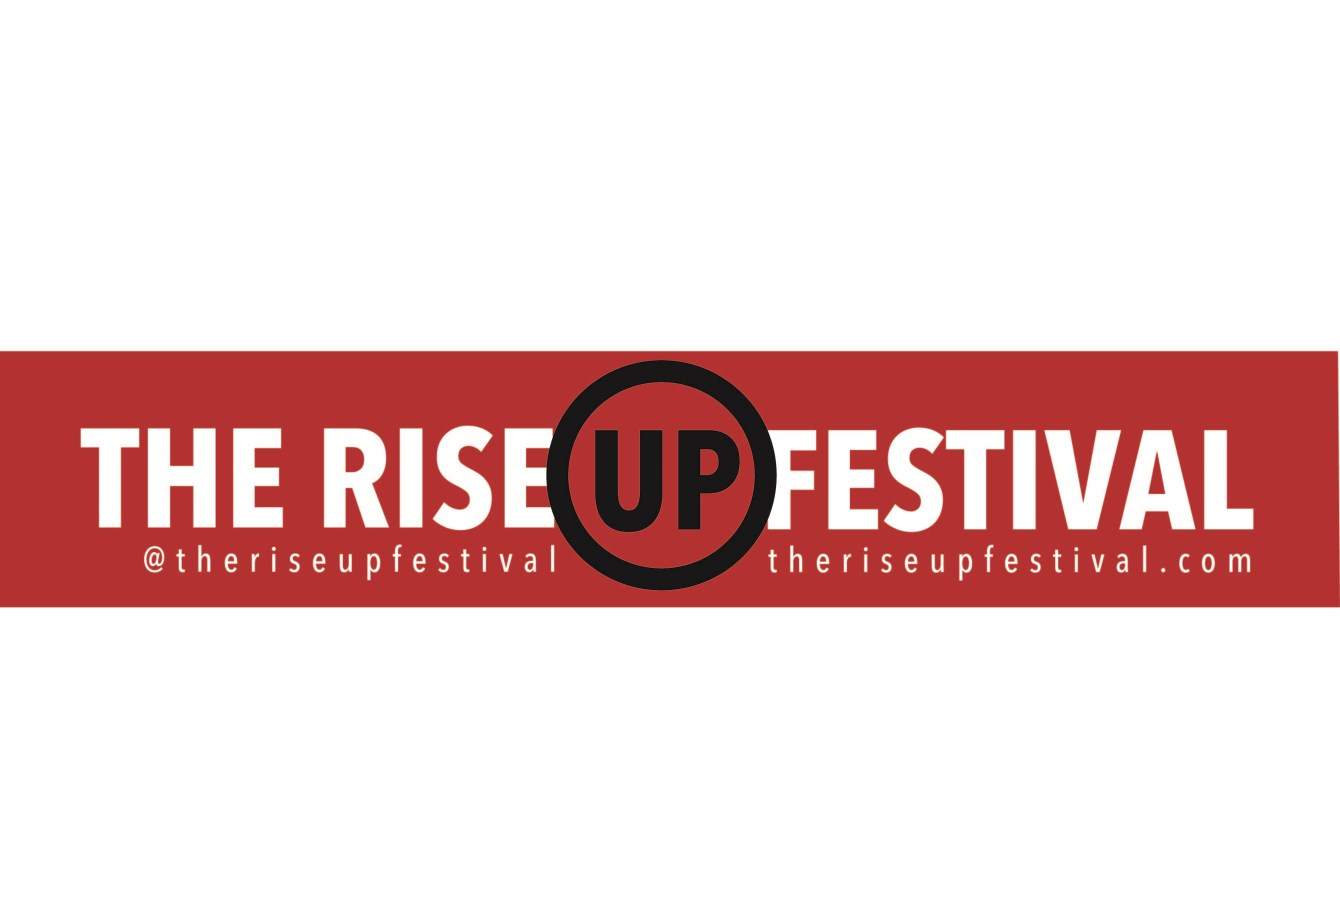 The Rise Up Festival - The Uk's First & Largest Alcohol-Free Festival - Página frontal